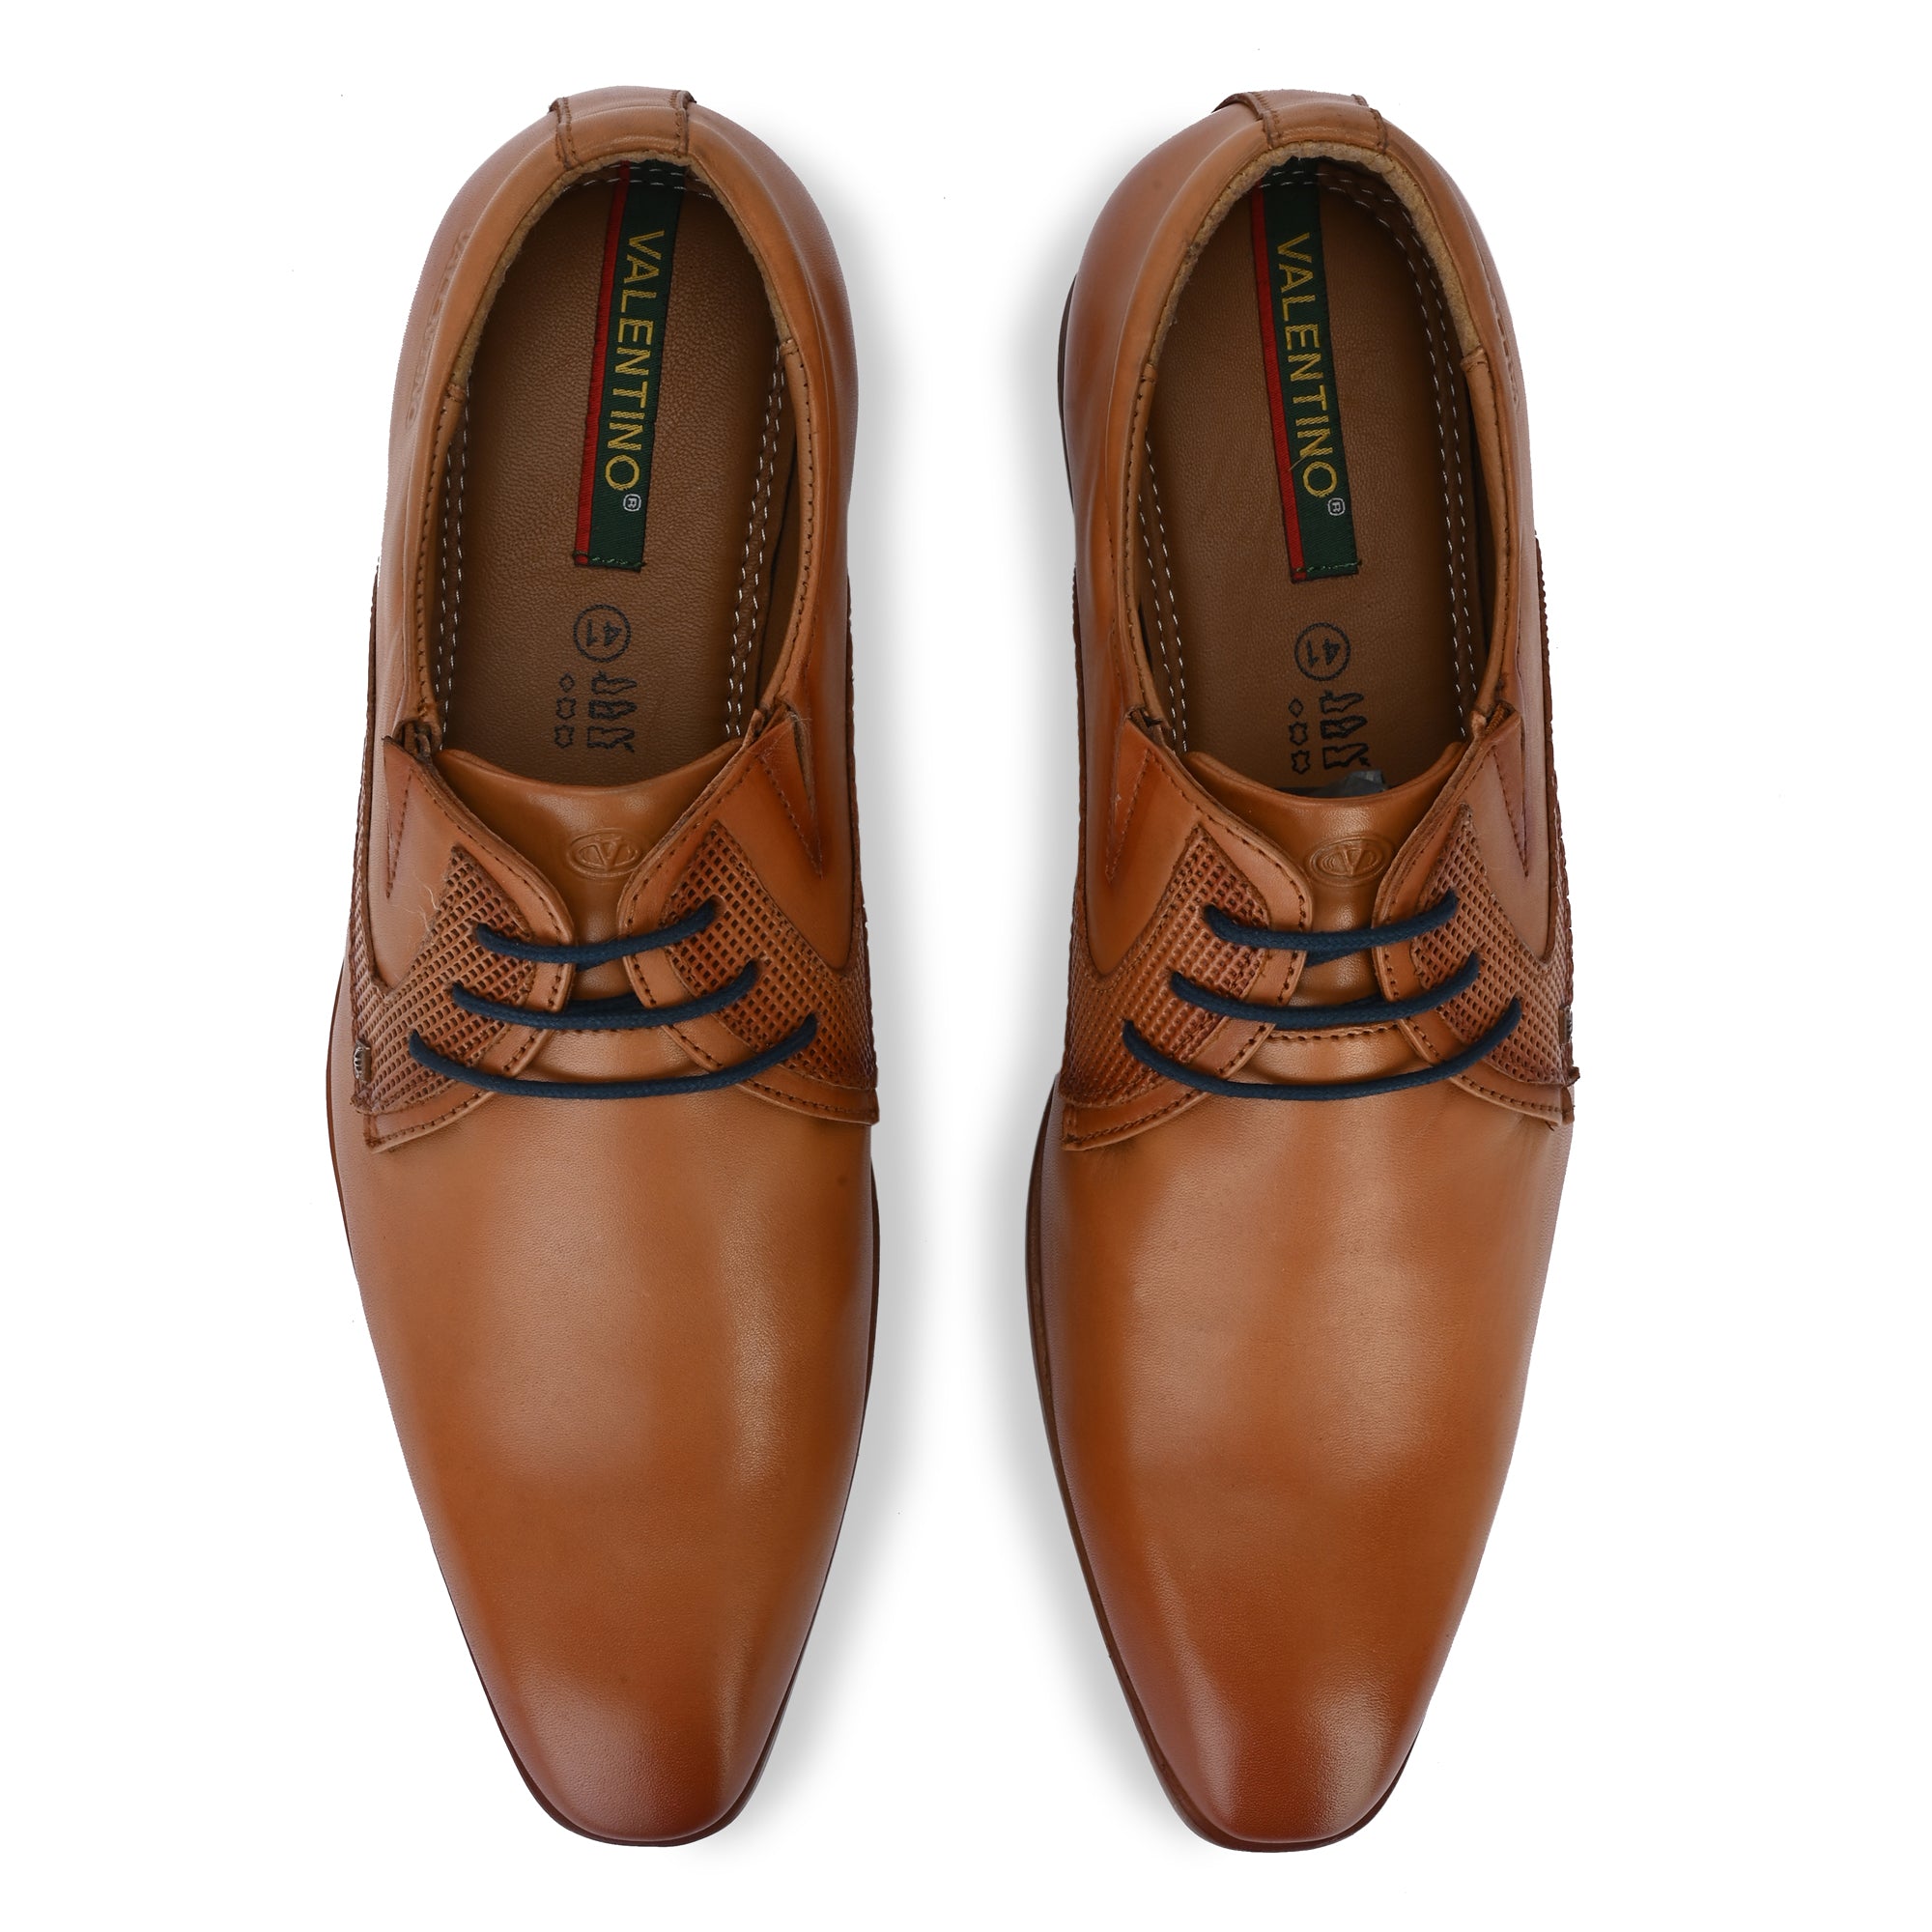 VICTOR-58 MEN LEATHER TAN FORMAL LACE UP DERBY